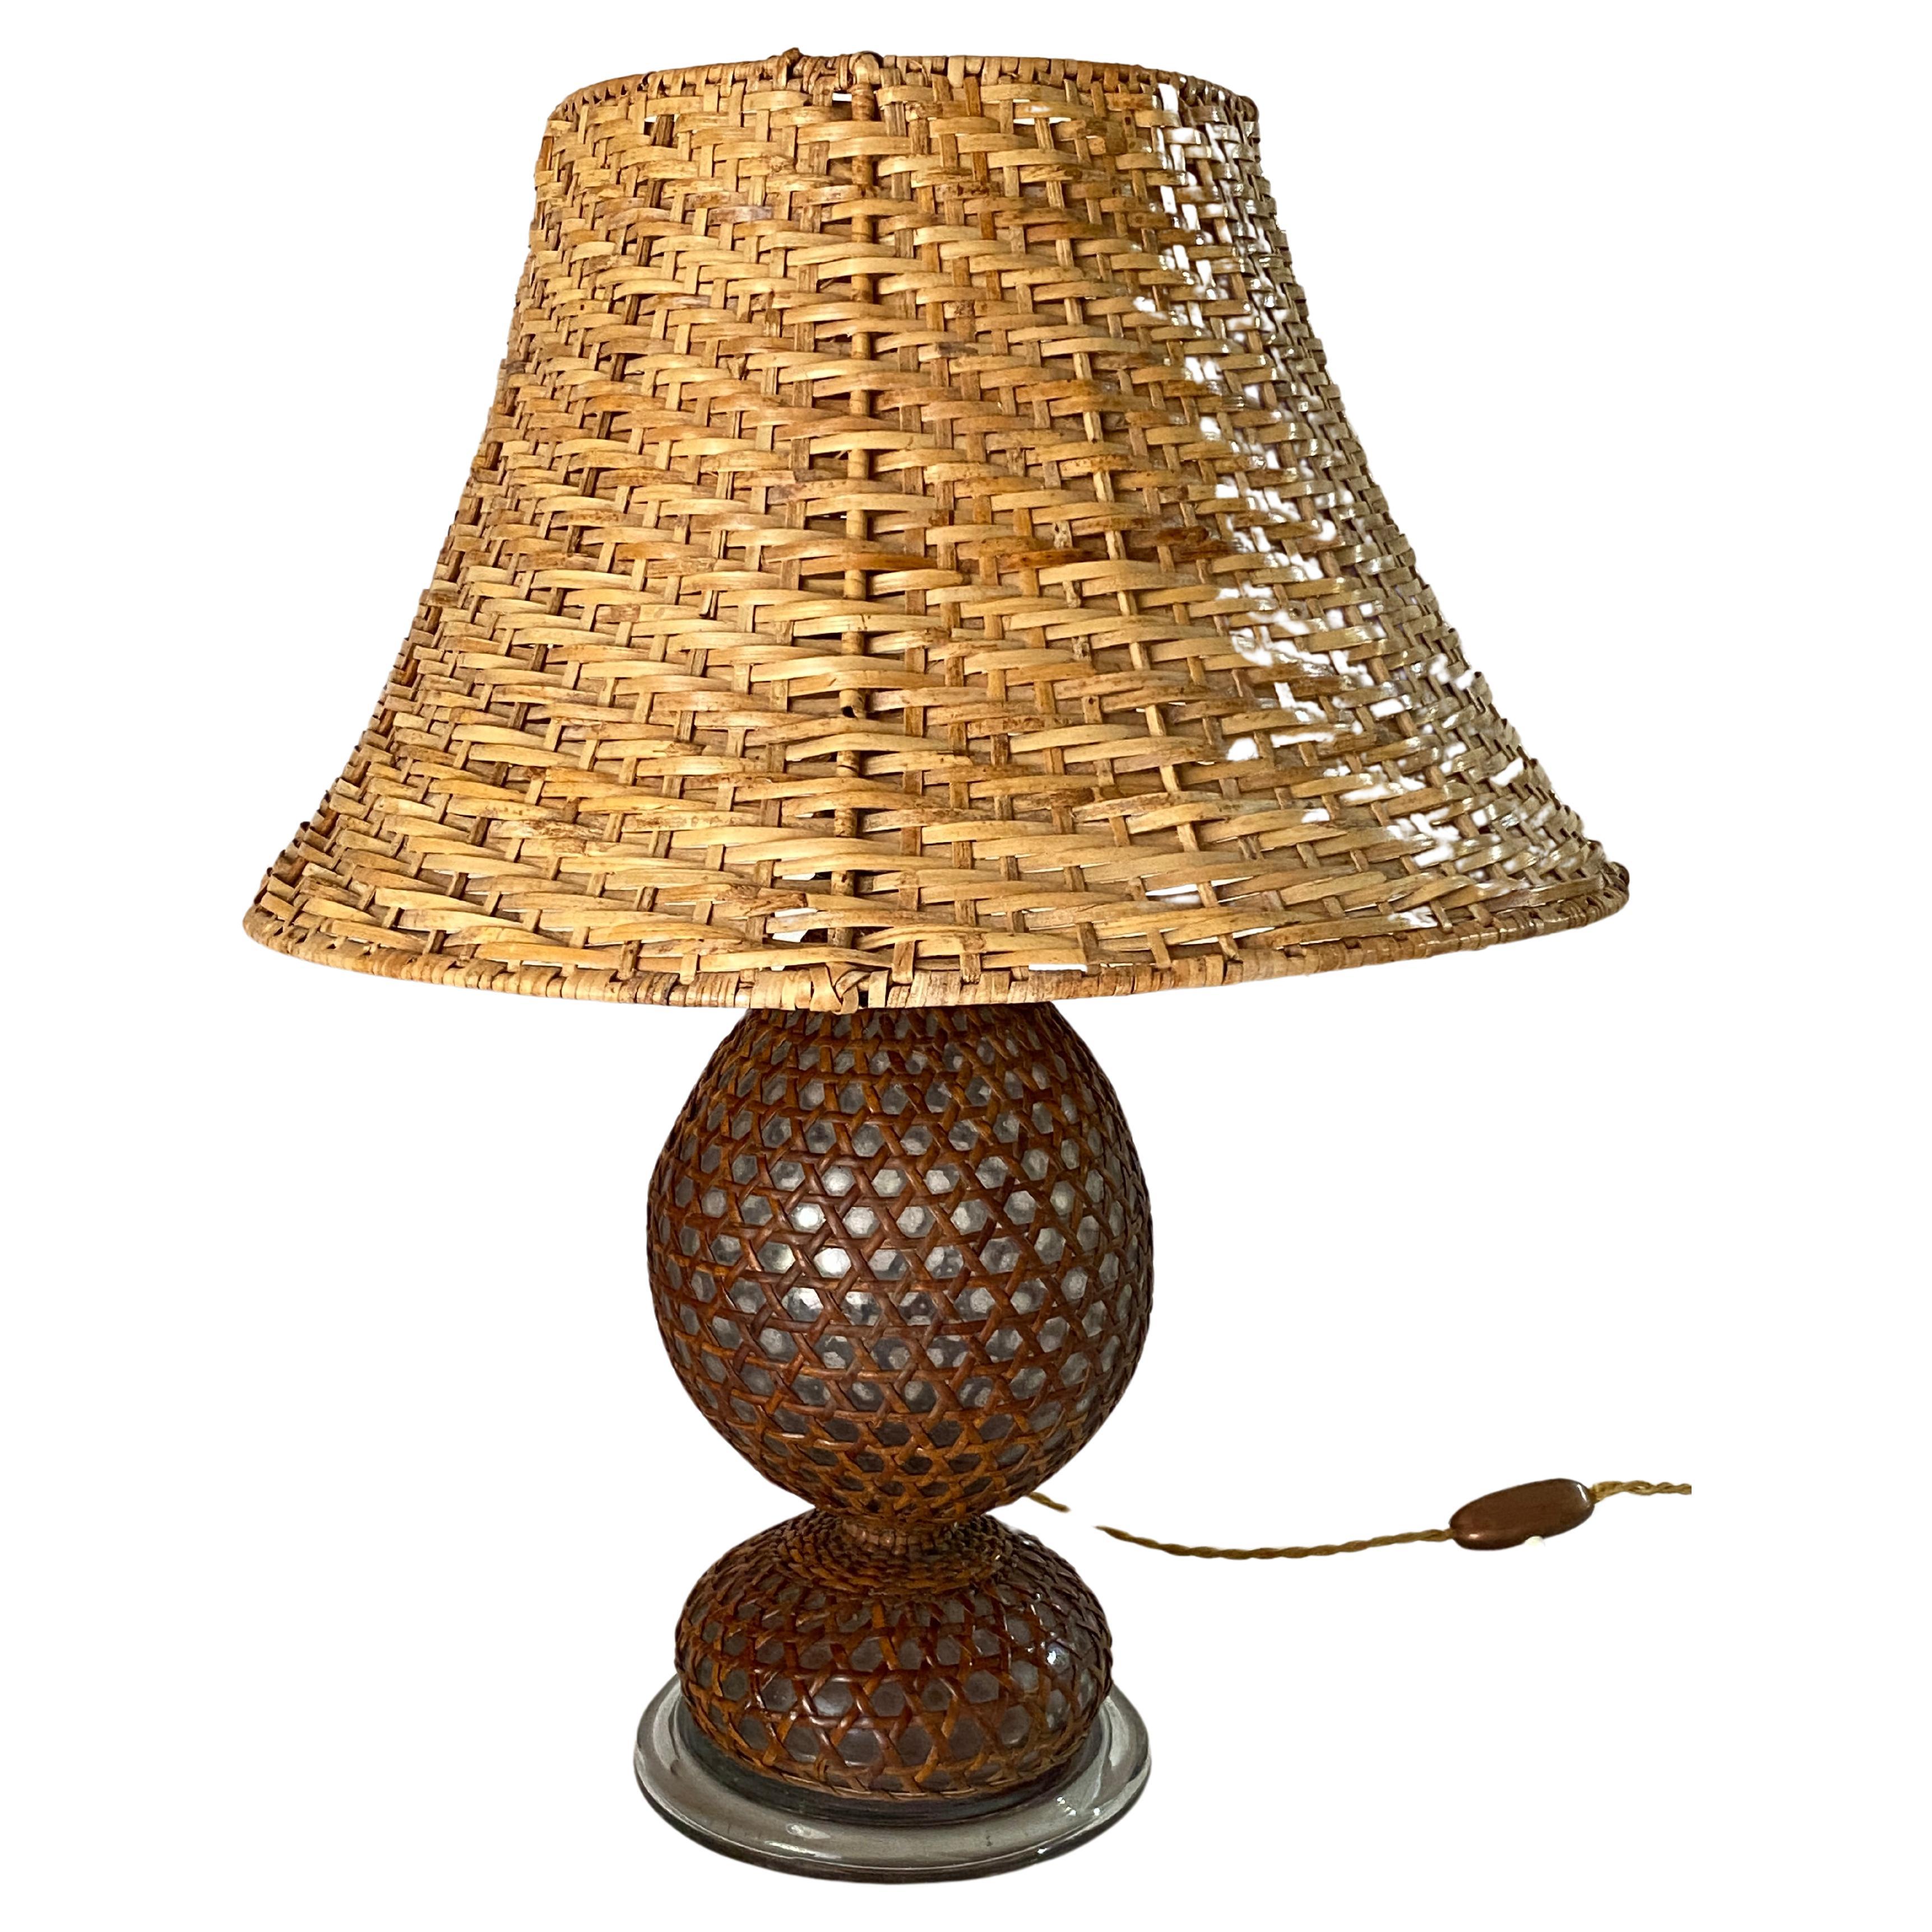 Glass and Rattan Table Lamp, Made in England, Brown Color, Circa 1970 For Sale 2